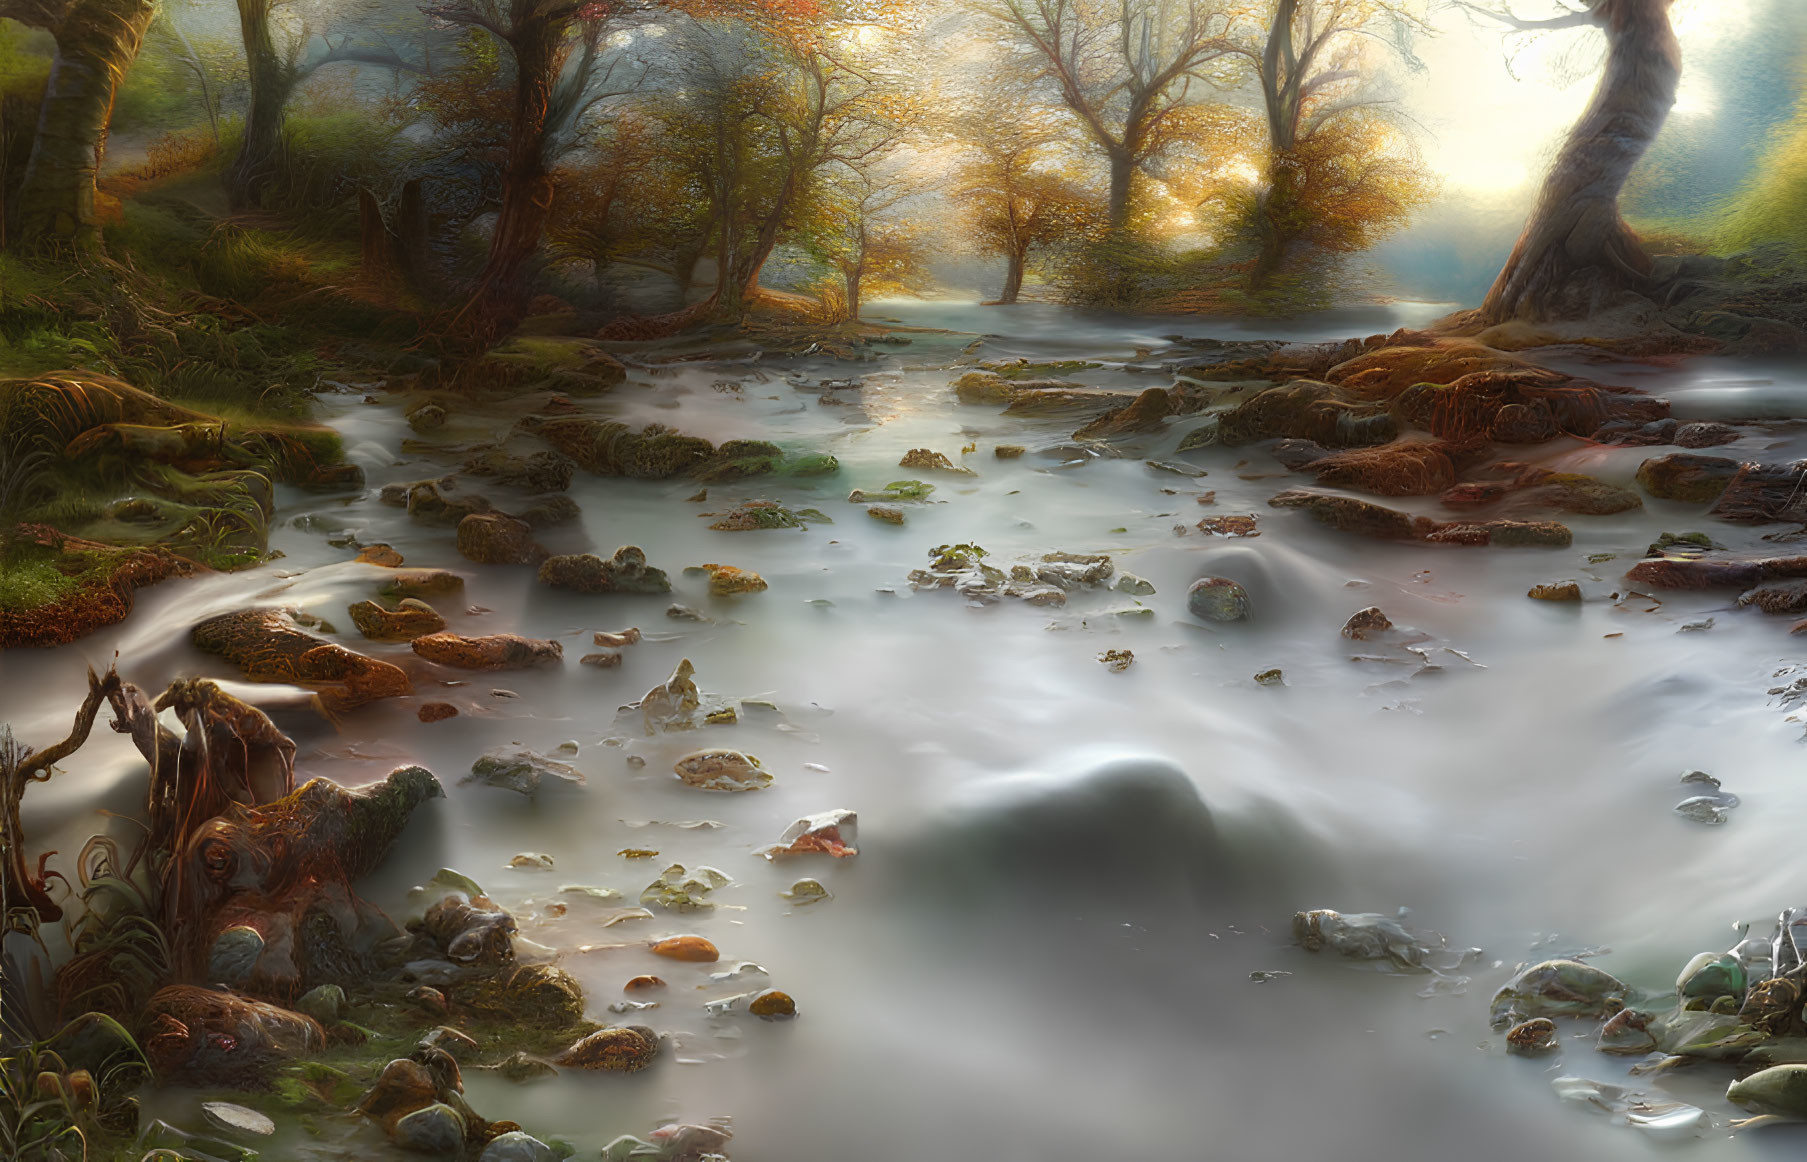 Tranquil forest river scene with misty water and autumn trees